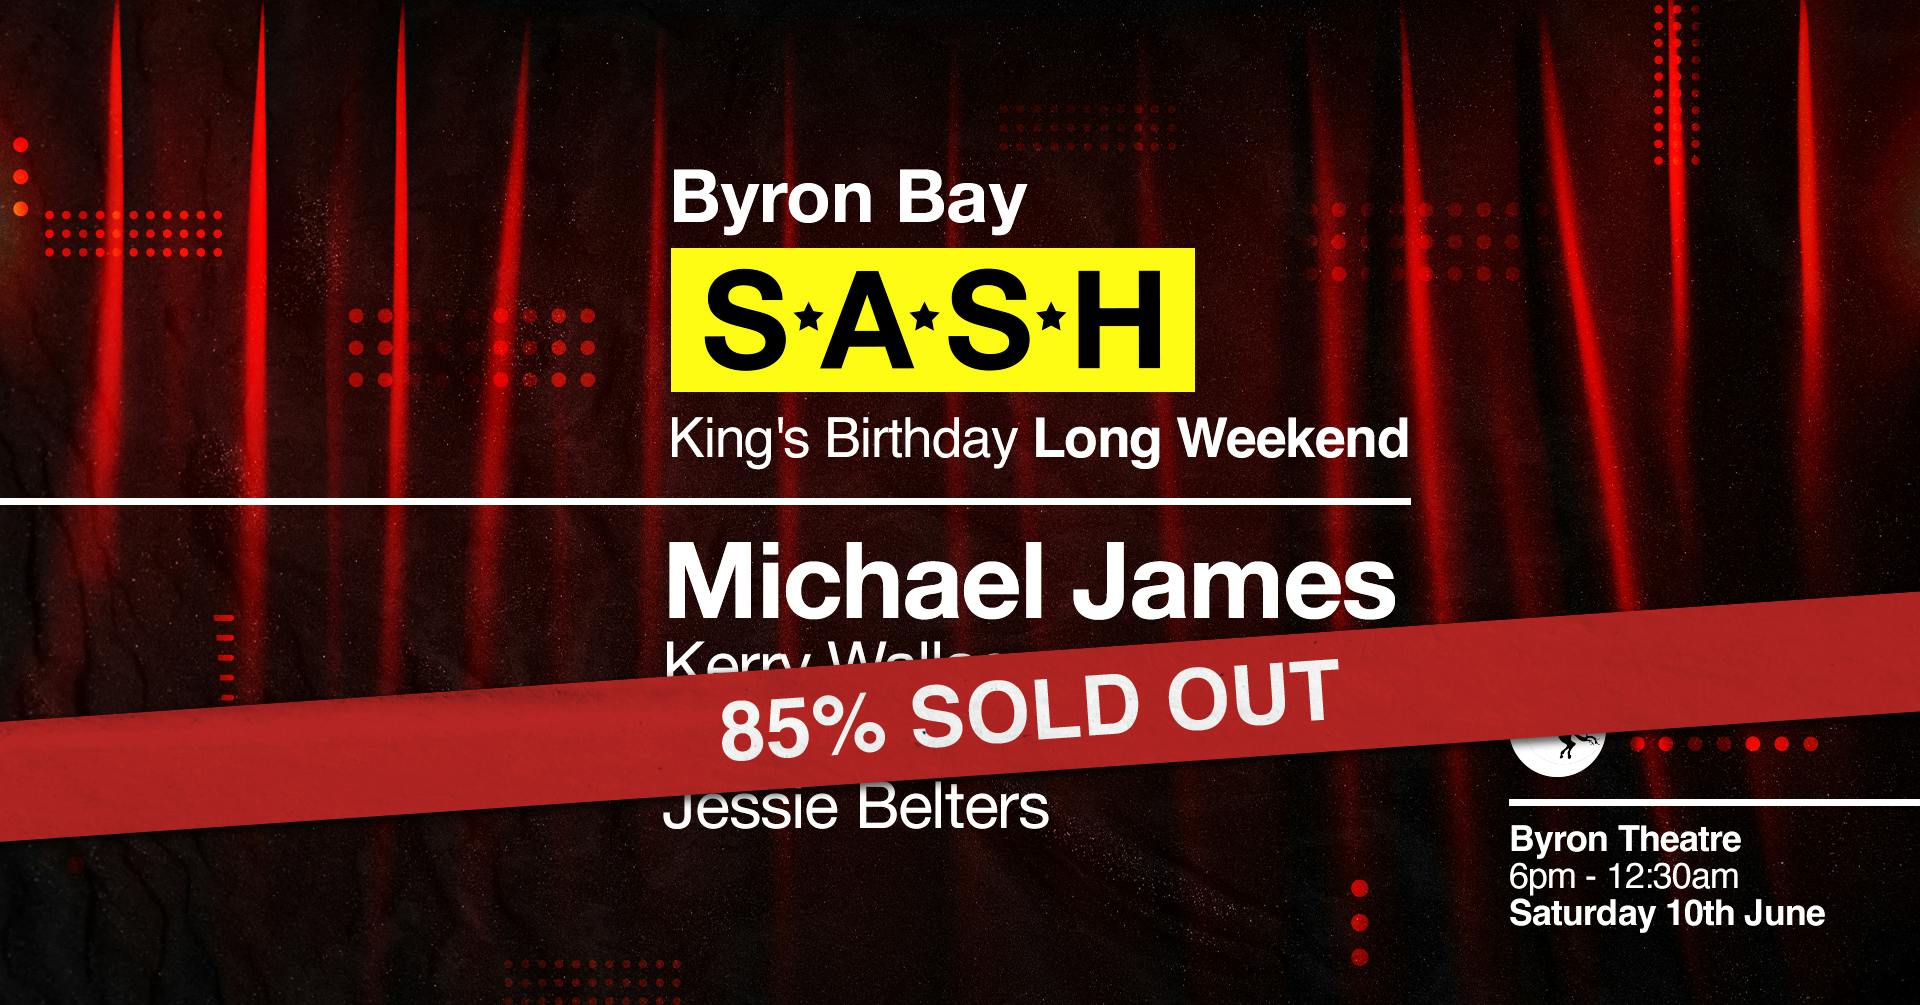 ★ S.A.S.H Byron Bay ★ King’s Birthday Long Weekend ★ Michael James ★ Saturday 10th June ★